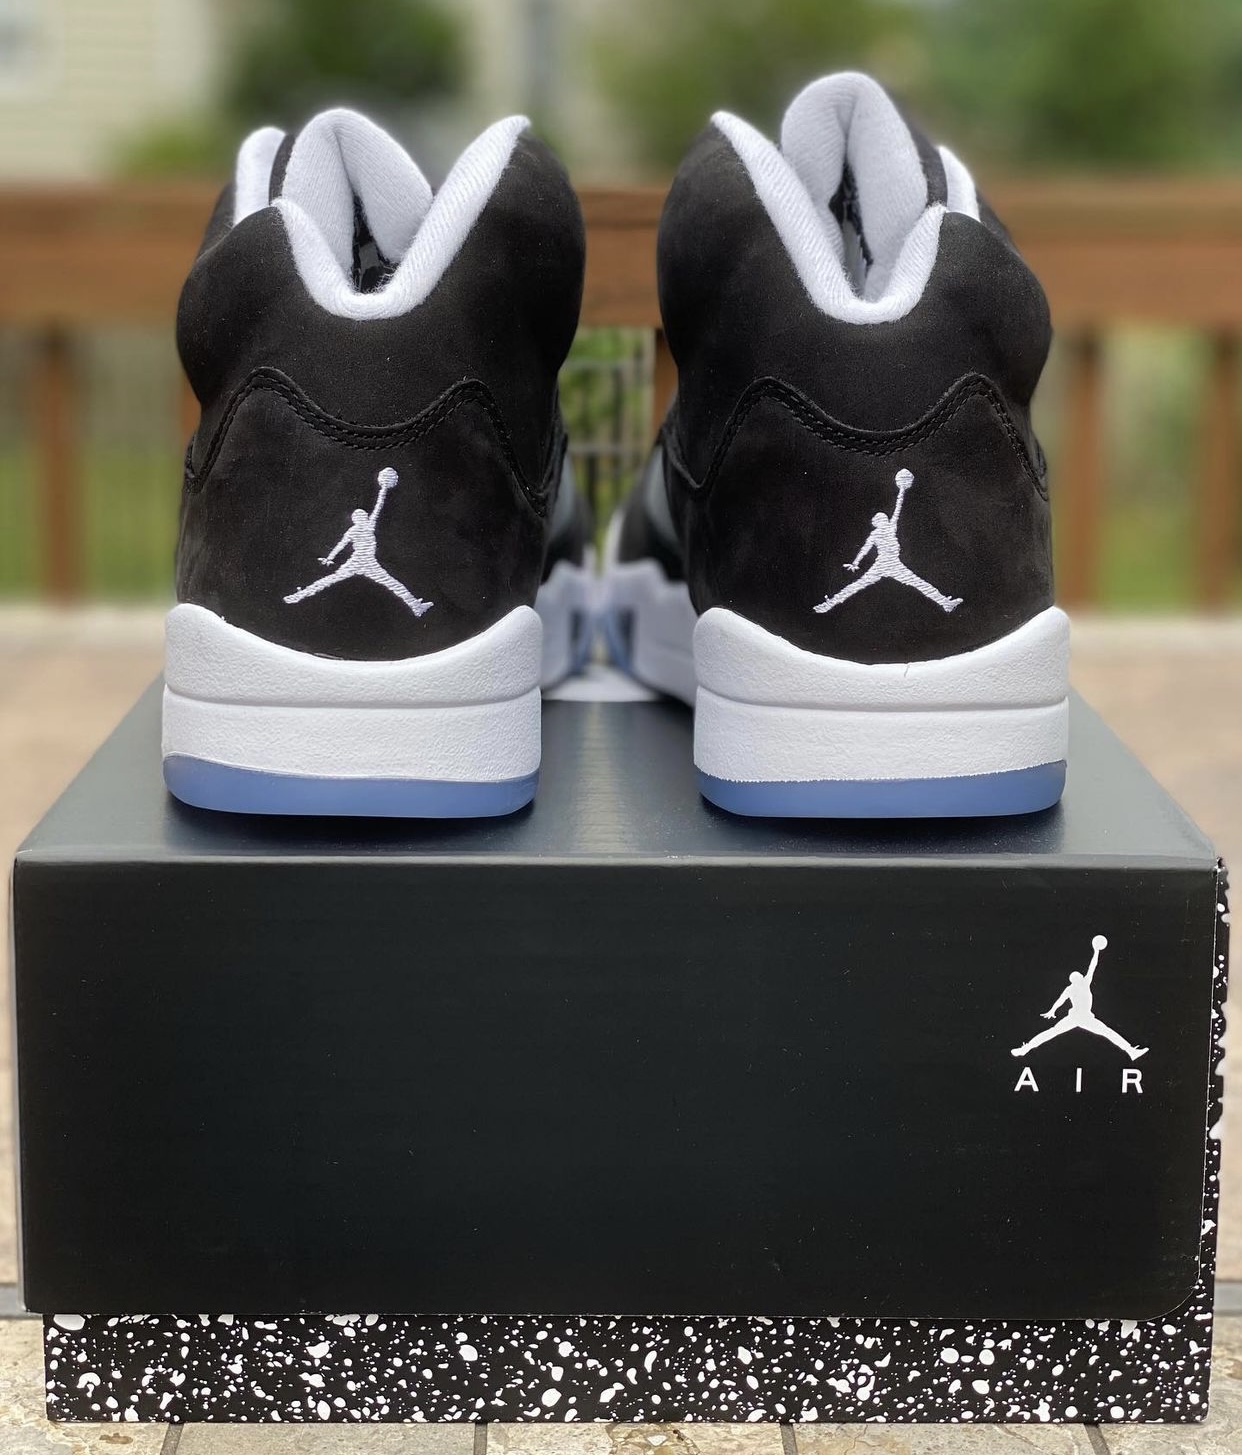 Женские кроссовки nike air jordan Covered 1 white grey x dior 36-37-38-39-40-41 2021 CT4838-011 Release Date